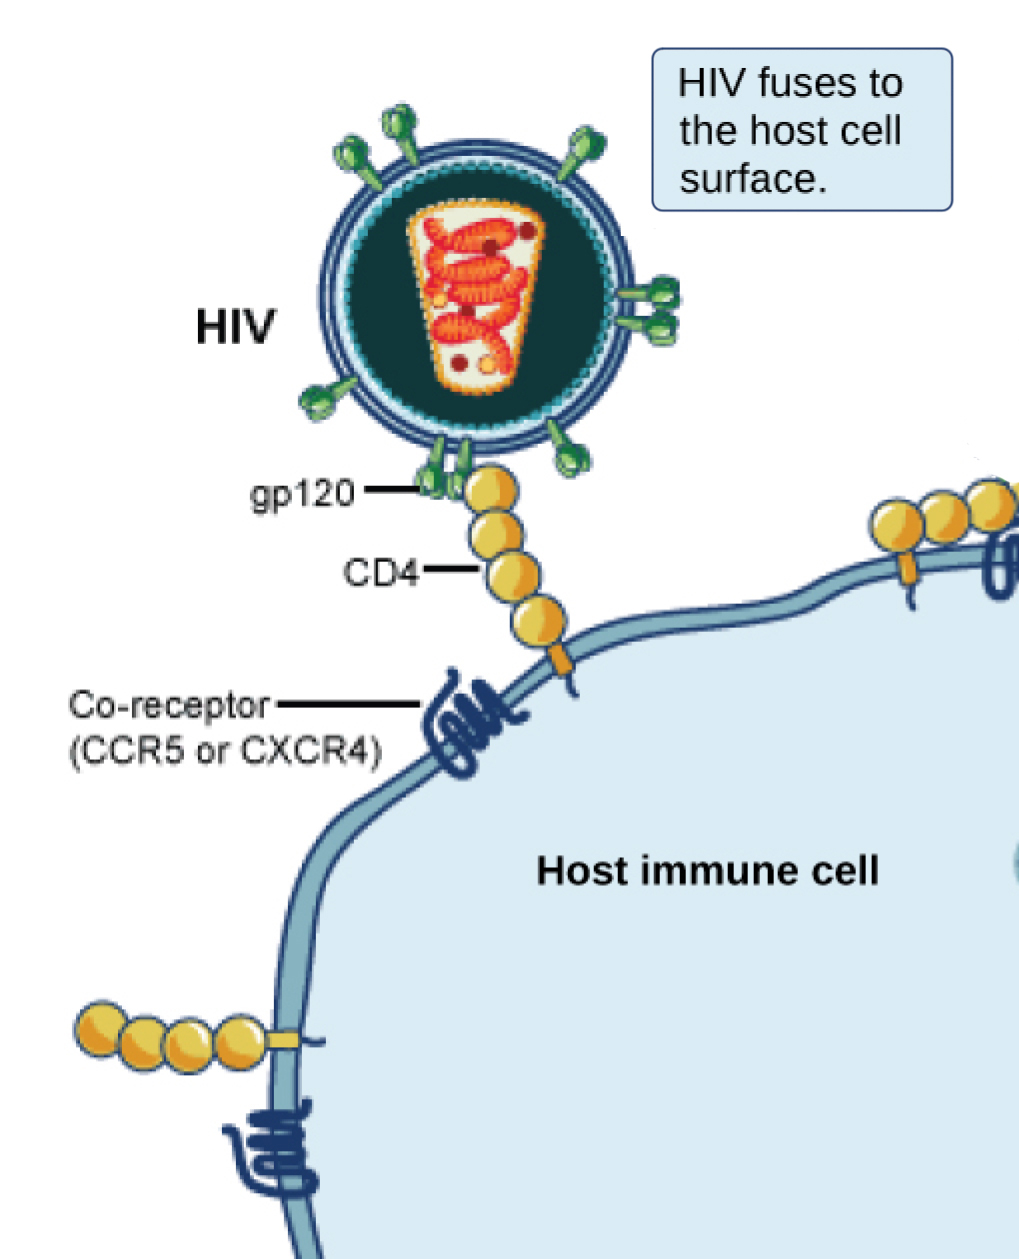 In the illustration a viral receptor on the surface of an H I V virus is attaches to a co-receptor embedded in the plasma membrane. The co-receptor is either C C R 5 or C X C R 4.